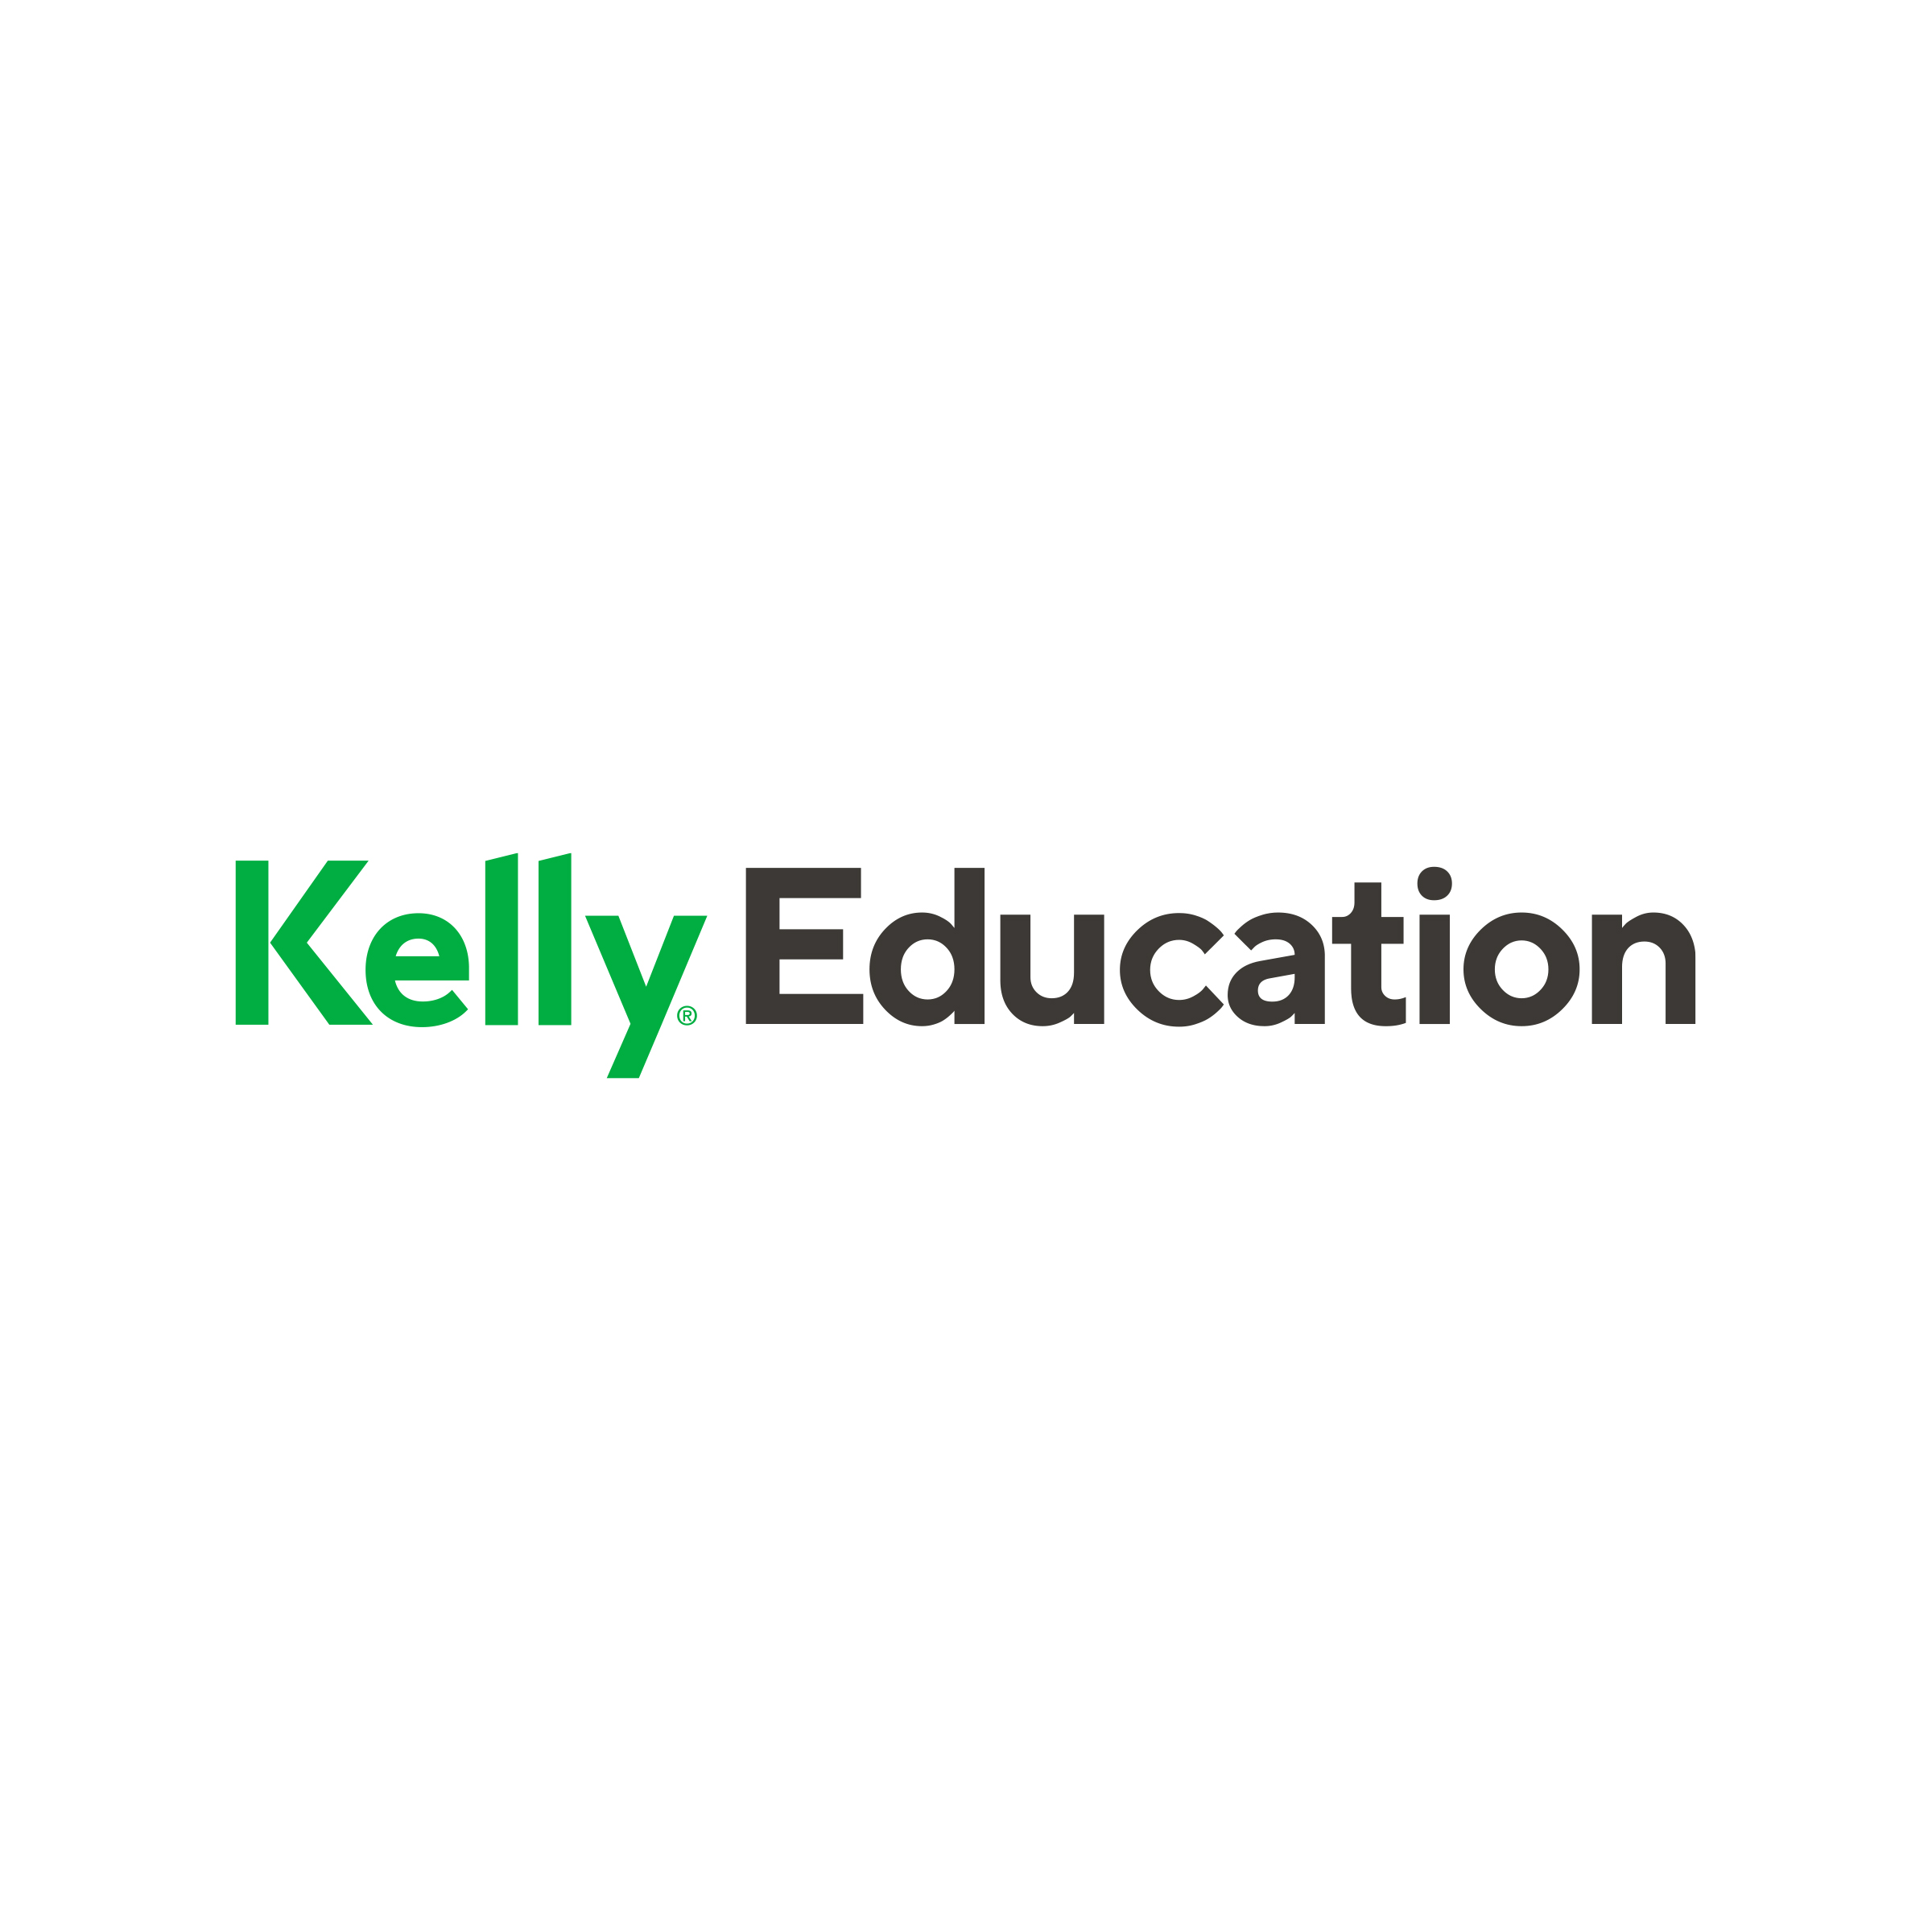 Kelly Education Announces Critical Solution to Address the